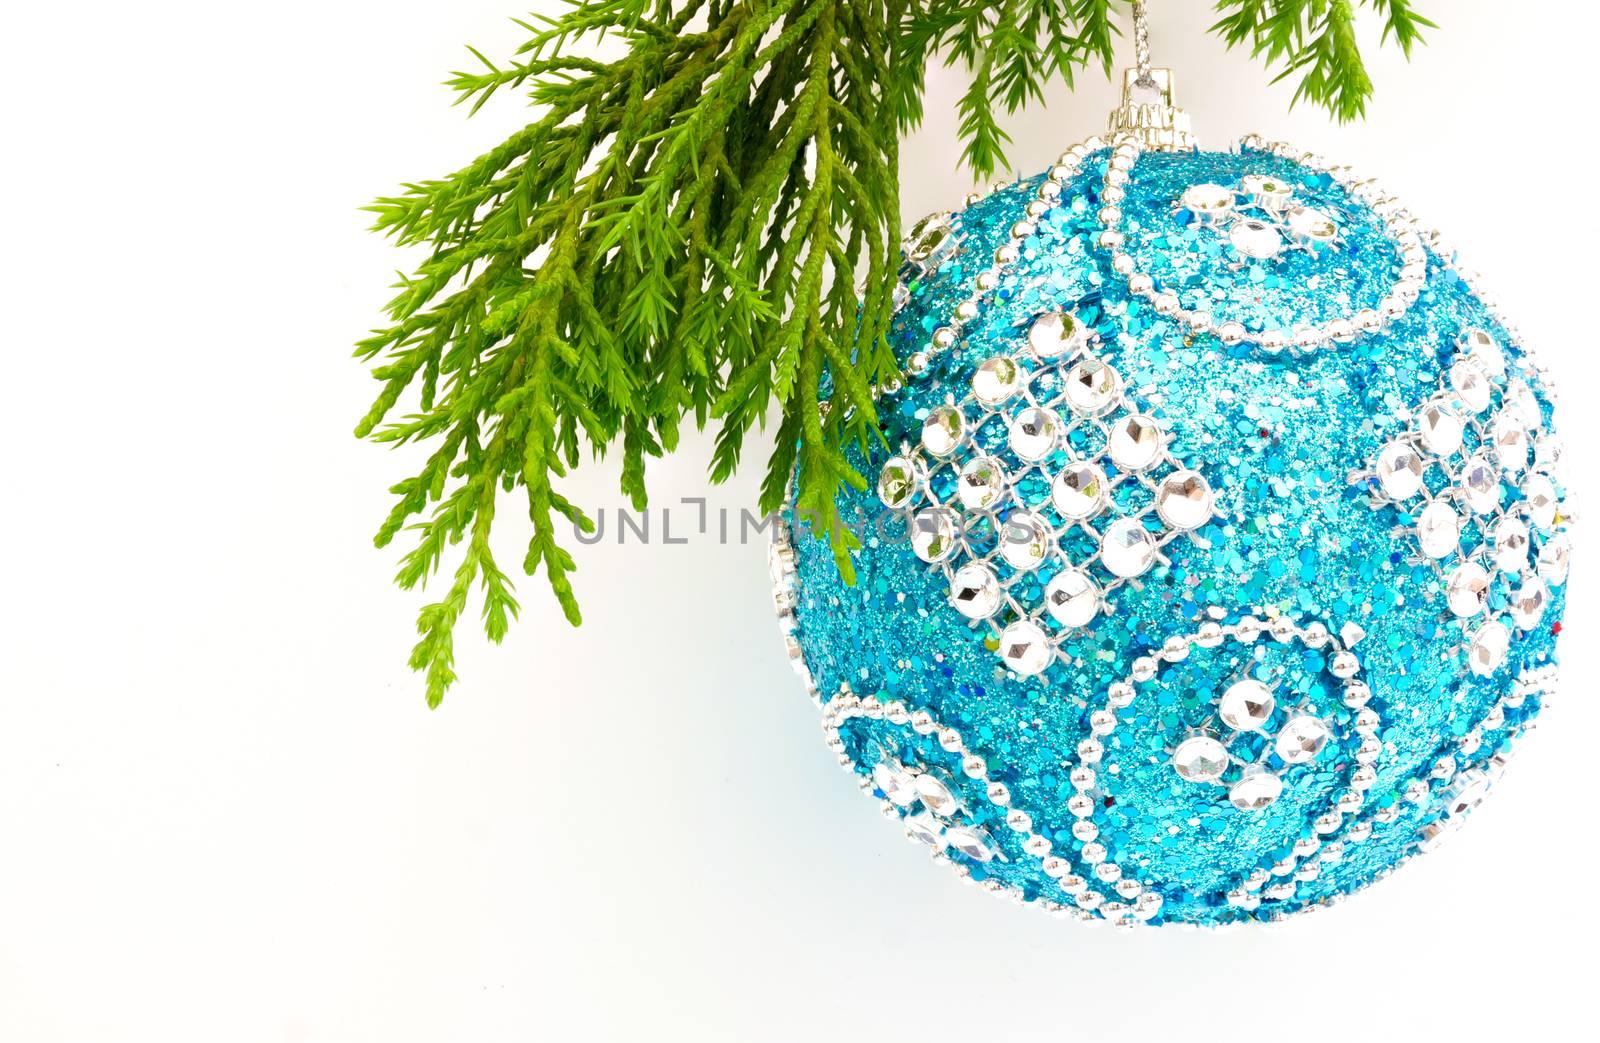 closeup image of a blue Christmas ball on a twig of an evergreen tree, isolated on white background